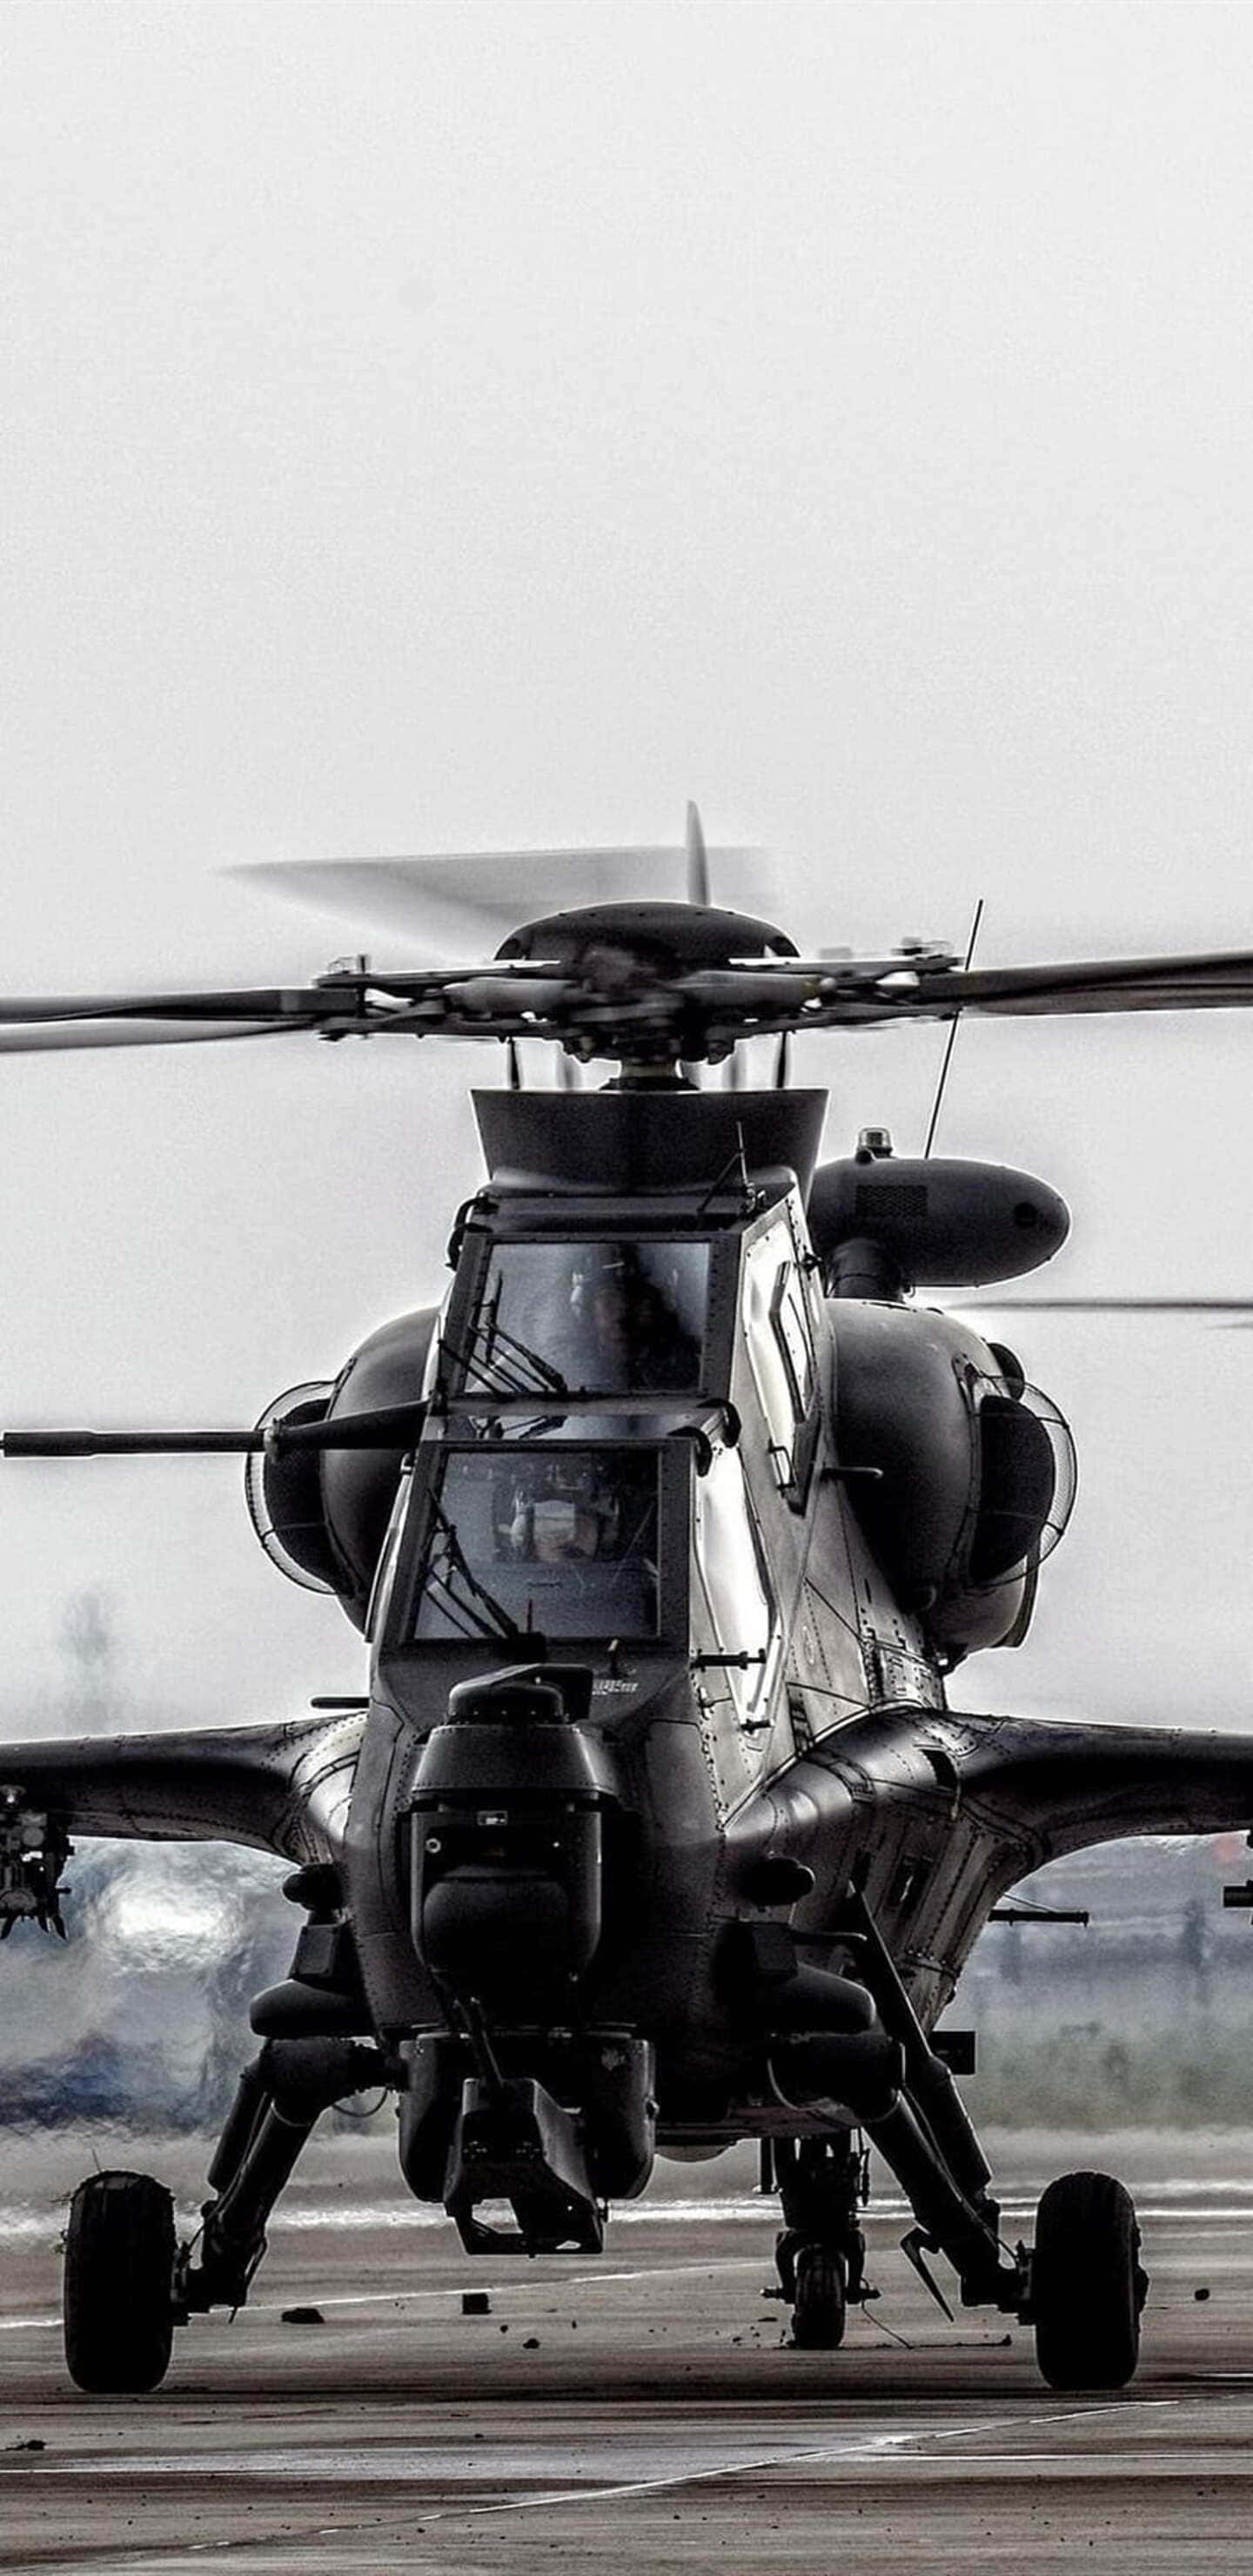 Pixel 3xl Helicopters Background CAIC Z-10